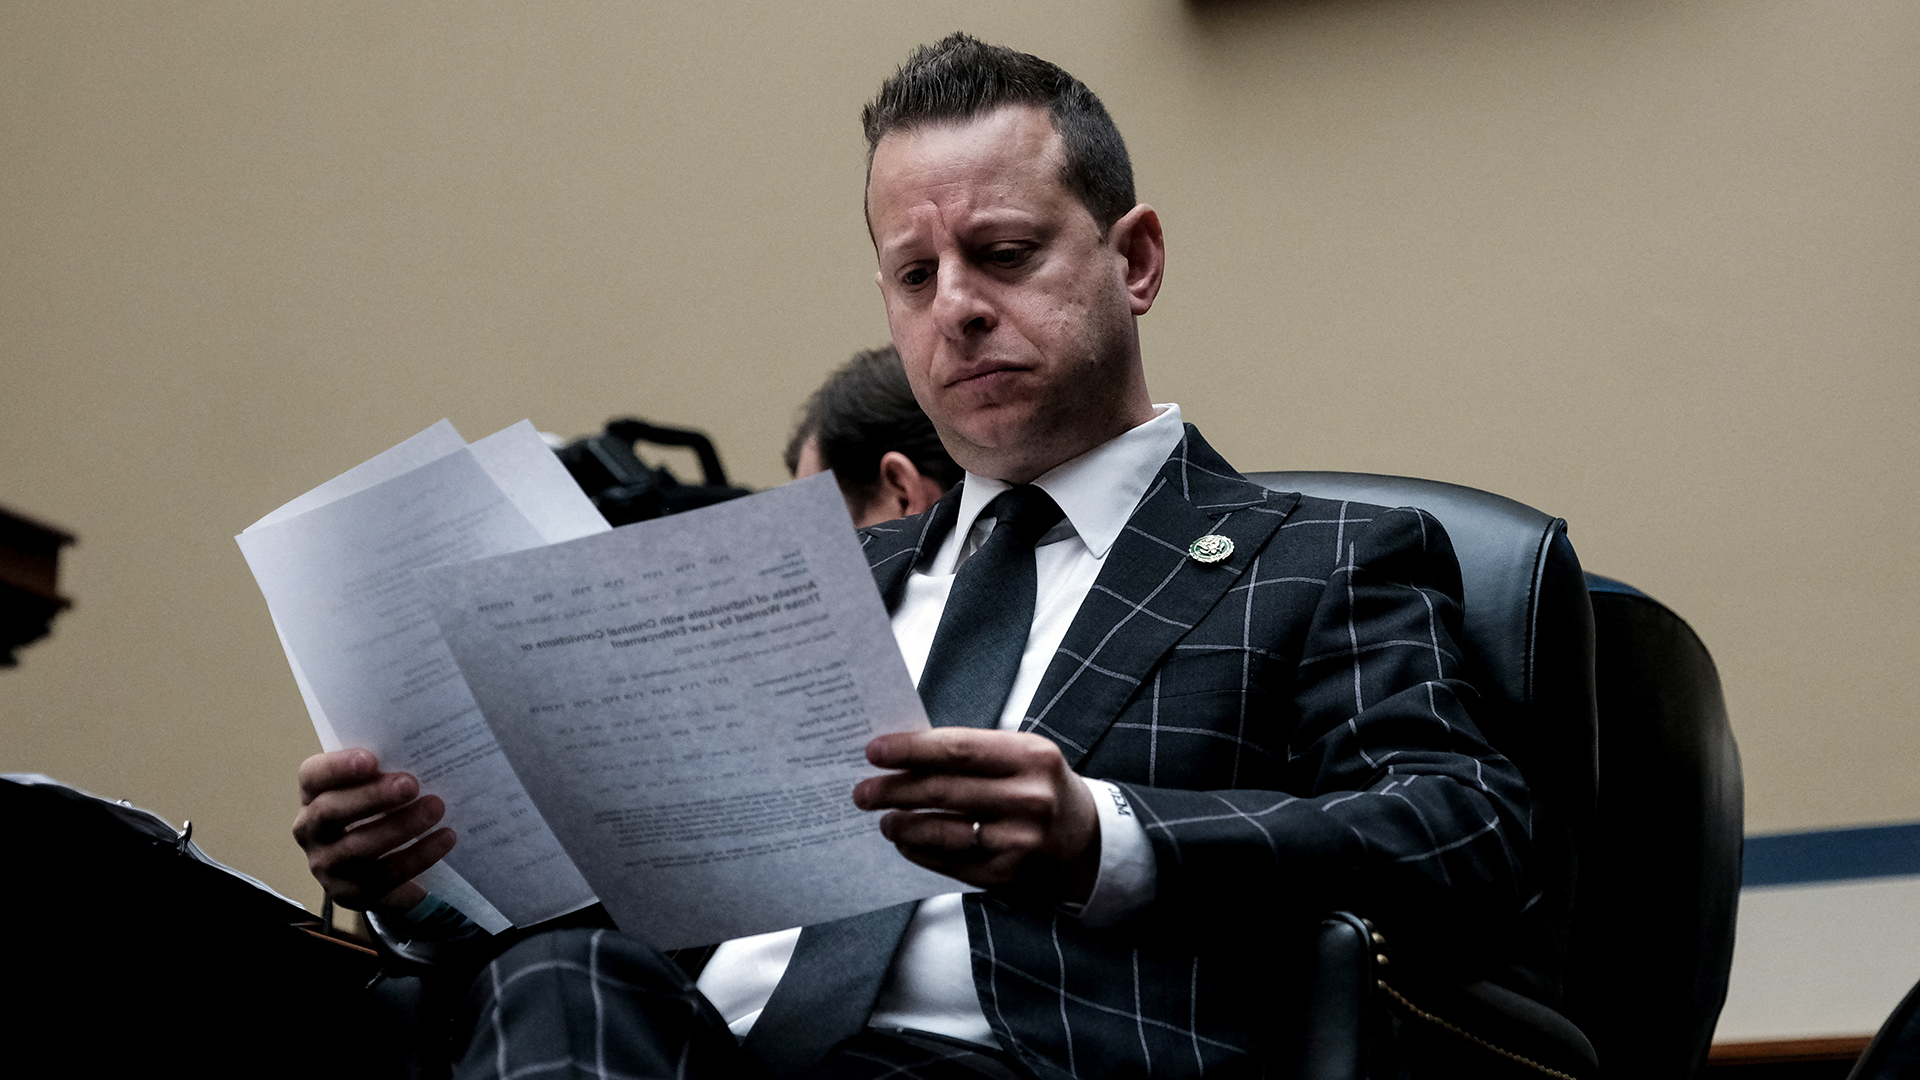 Rep. Jared Moskowitz reviews notes during a House Oversight Committee hearing on the “border crisis” on Capitol Hill in Washington, DC, in February.